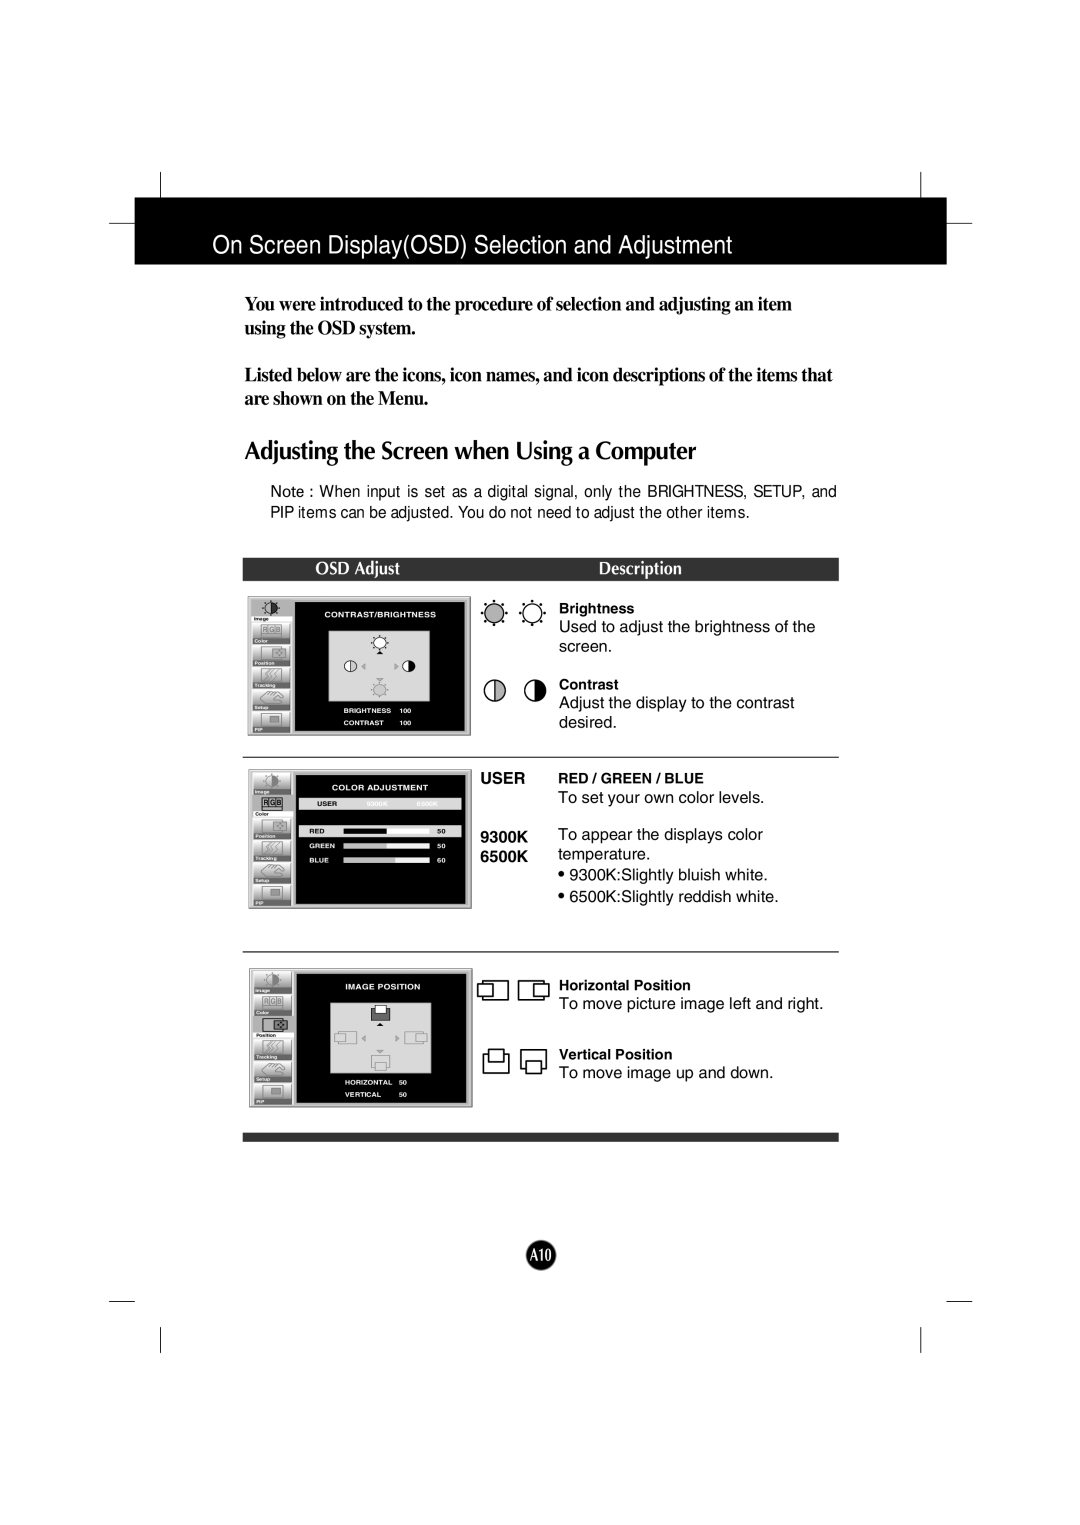 Gateway FPD2200 manual On Screen DisplayOSD Selection and Adjustment, Adjusting the Screen when Using a Computer 